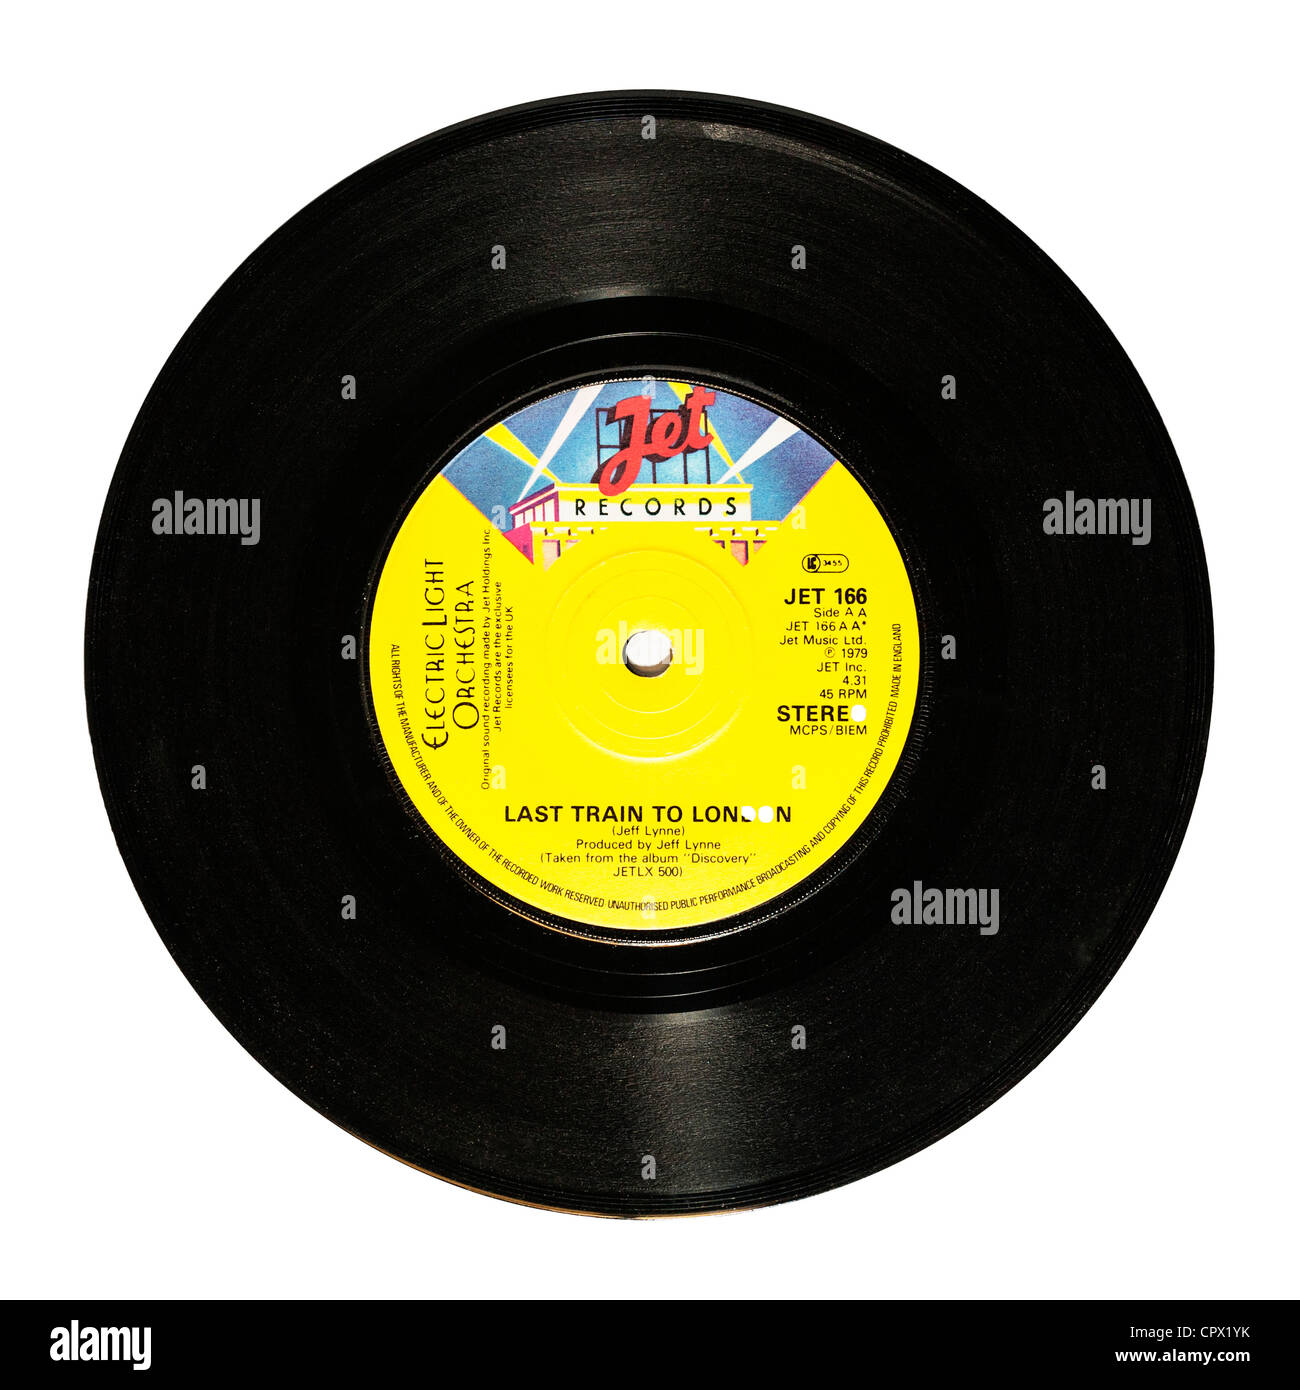 A vinyl single record by The Electric Light Orchestra ( E L O ) on a white background Stock Photo